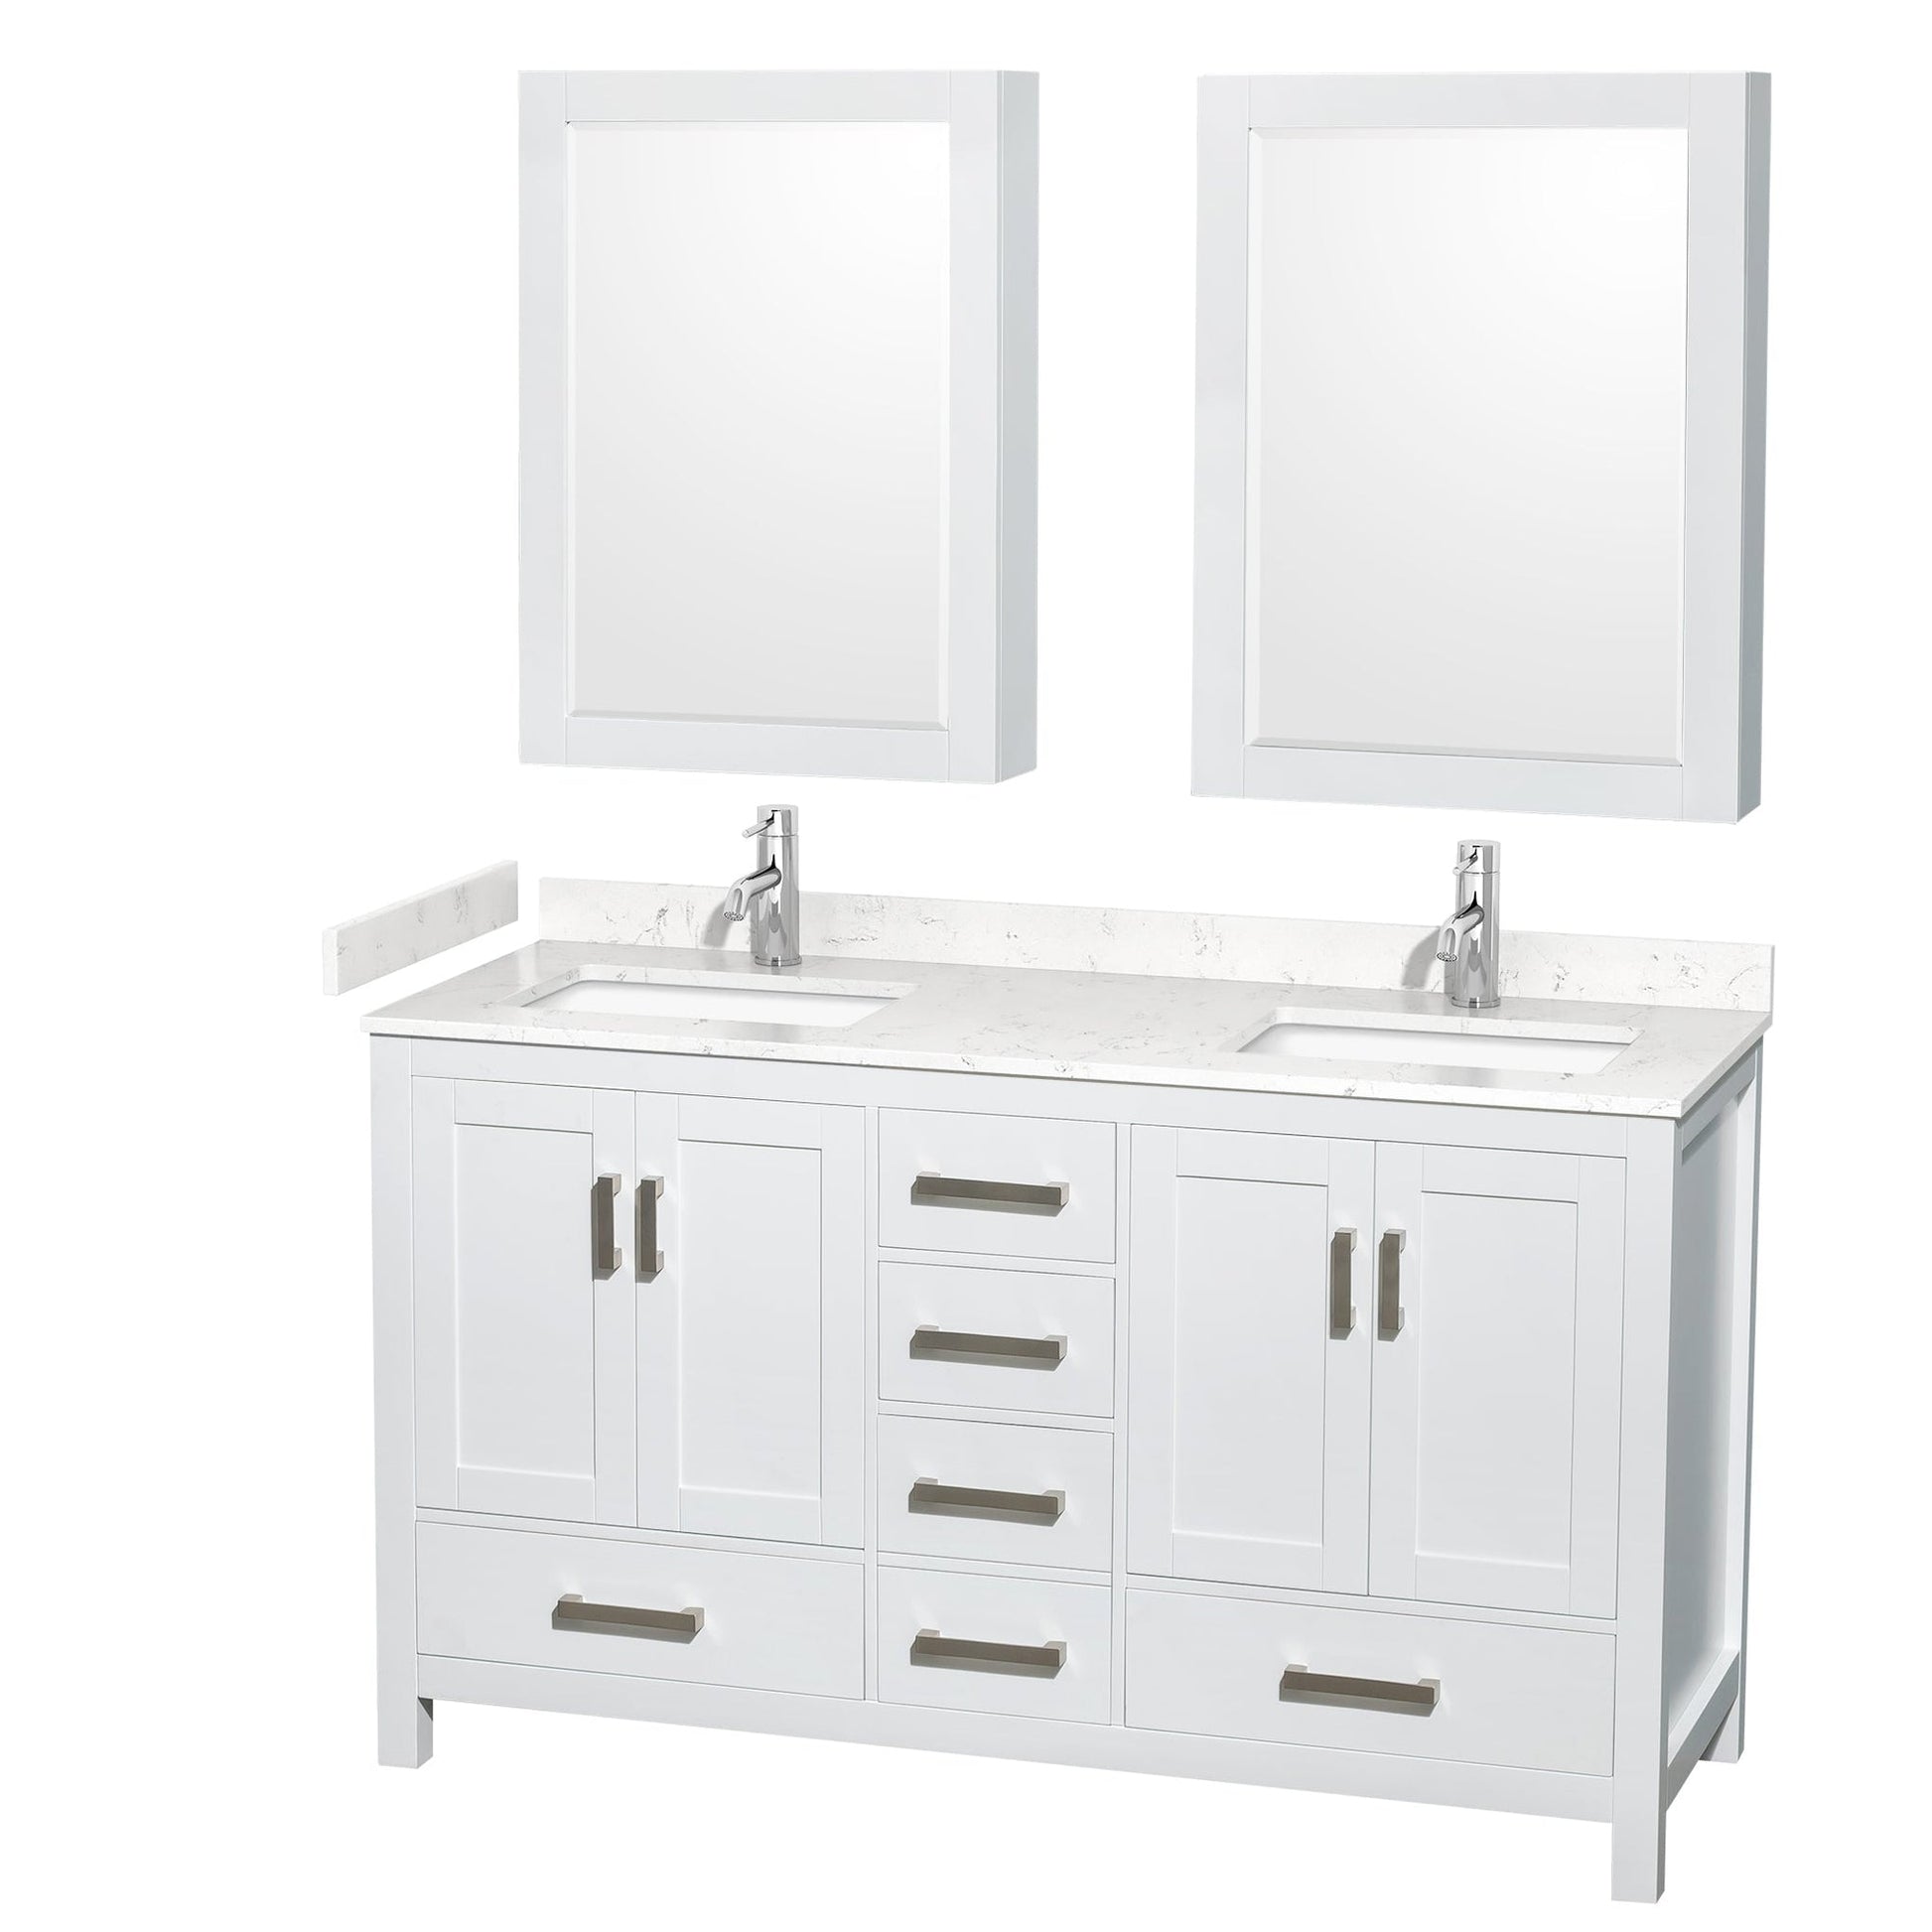 Wyndham Collection Sheffield 60" Double Bathroom Vanity in White, Carrara Cultured Marble Countertop, Undermount Square Sinks, Medicine Cabinet